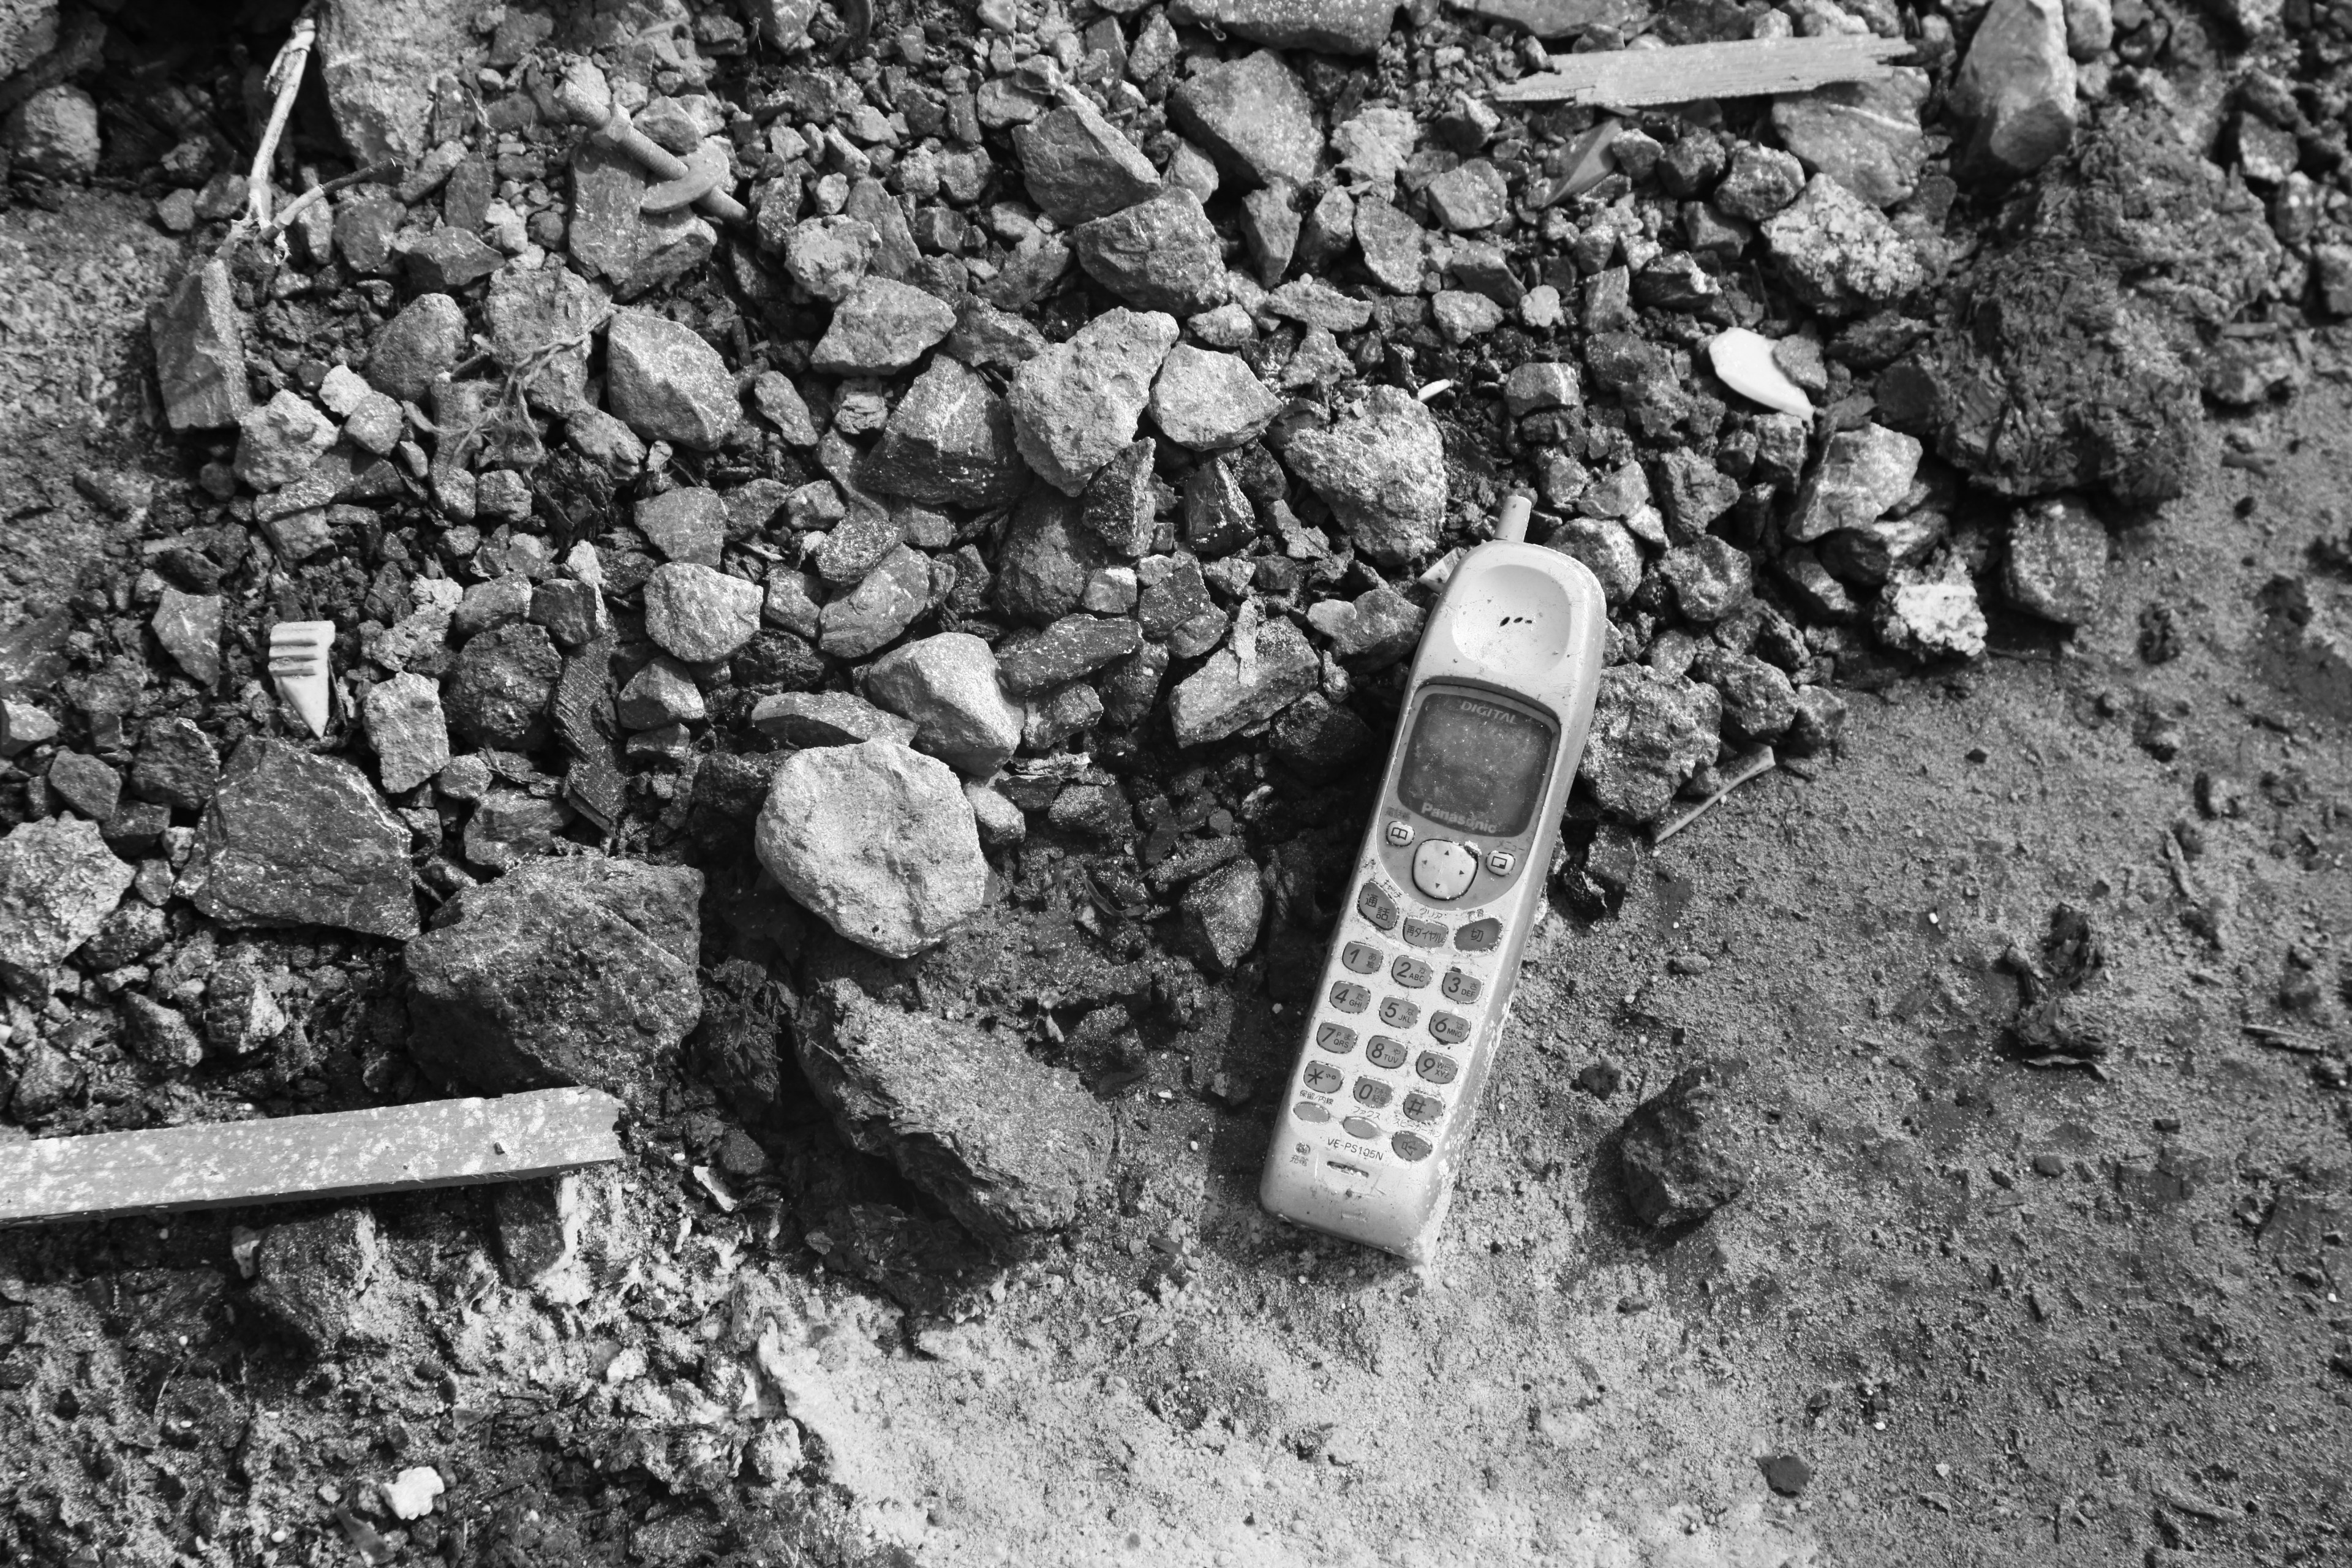 An old telephone lies amidst rubble and debris.